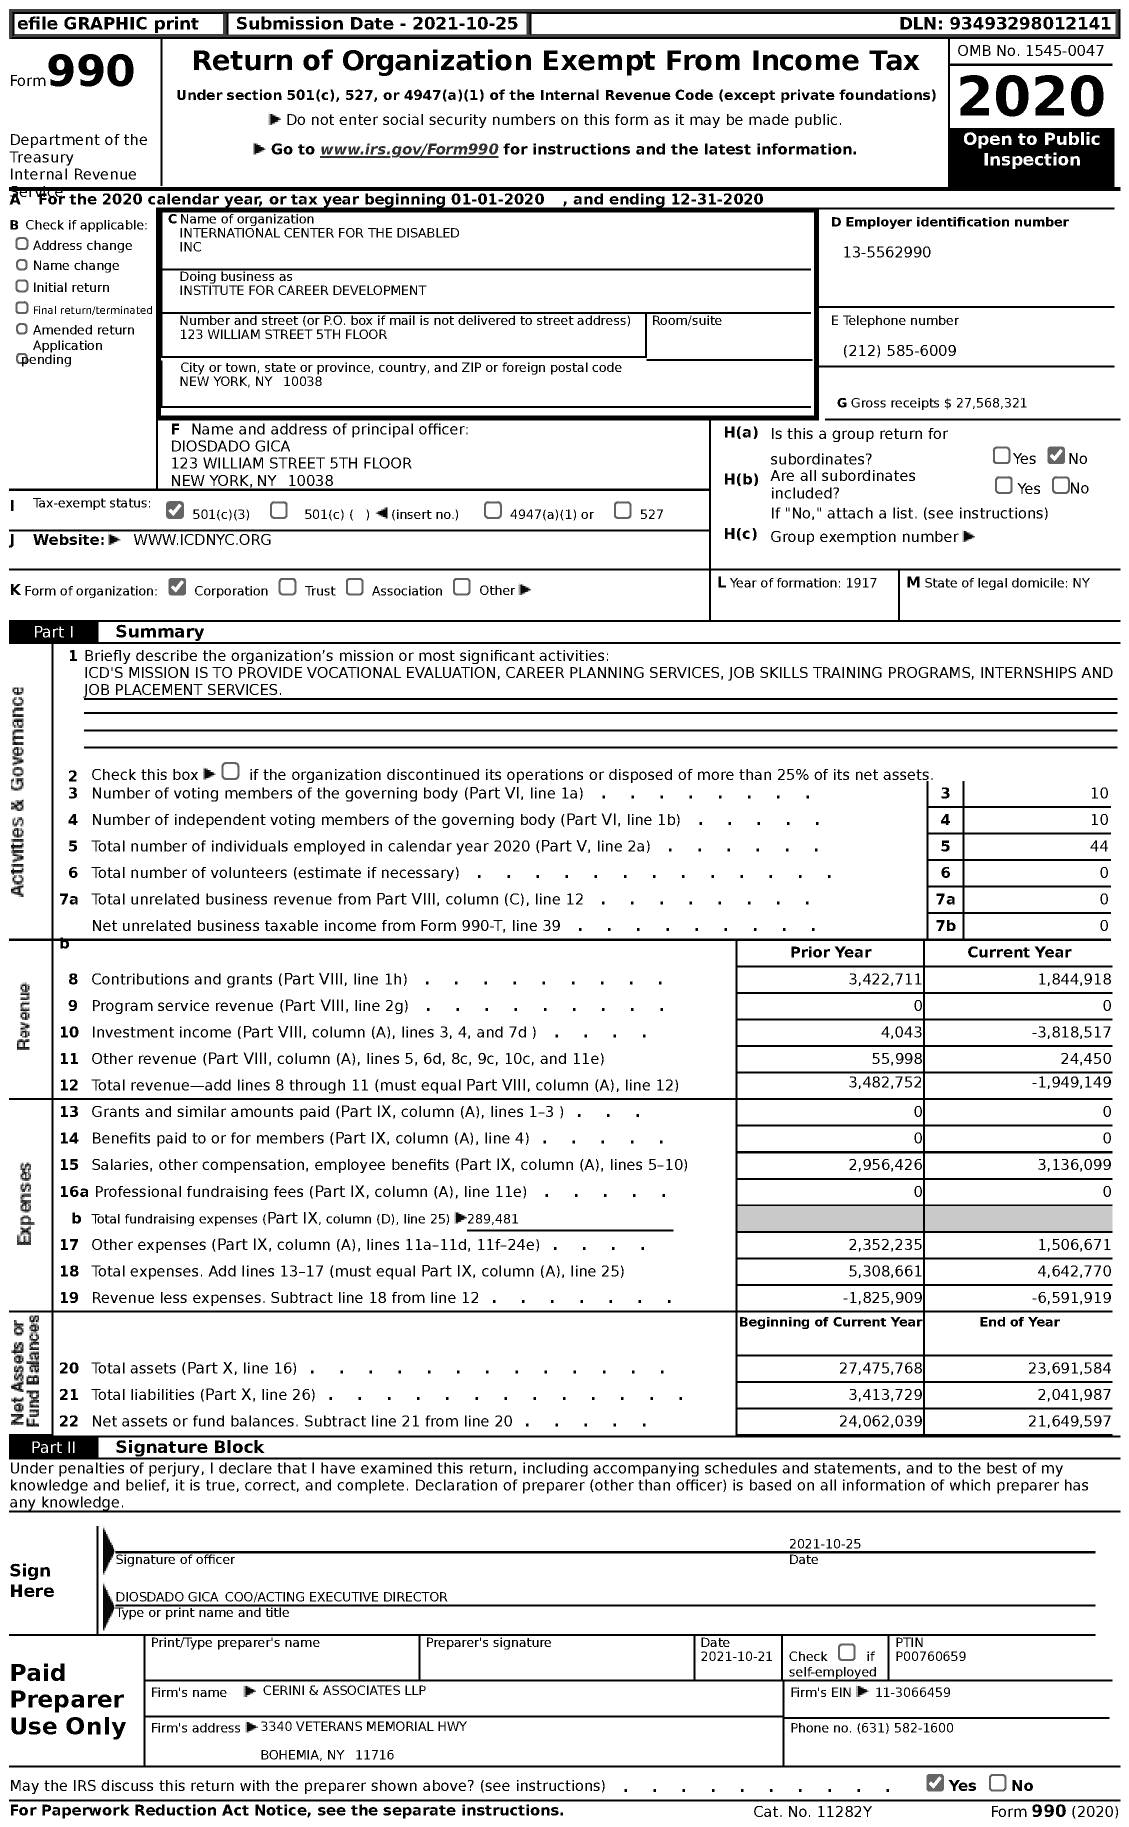 Image of first page of 2020 Form 990 for Institute for Career Development / International Center for the Disabled Inc (ICD)